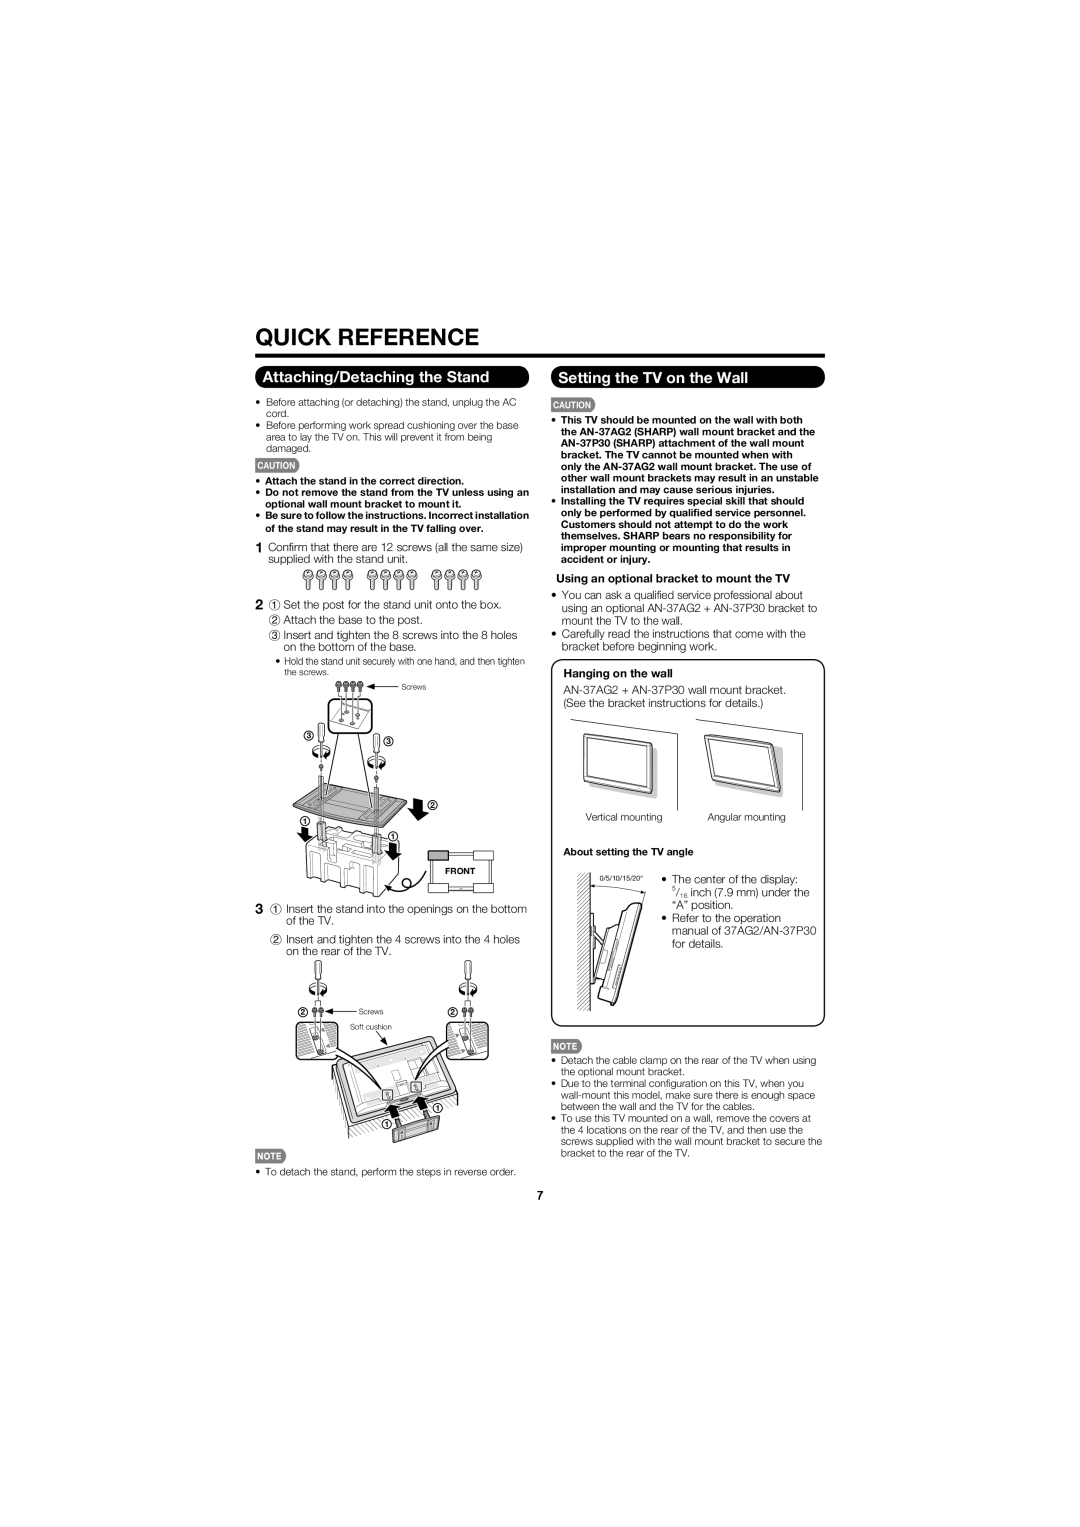 Sharp LC-40D78UN Quick Reference, Attaching/Detaching the Stand, Setting the TV on the Wall, Hanging on the wall 